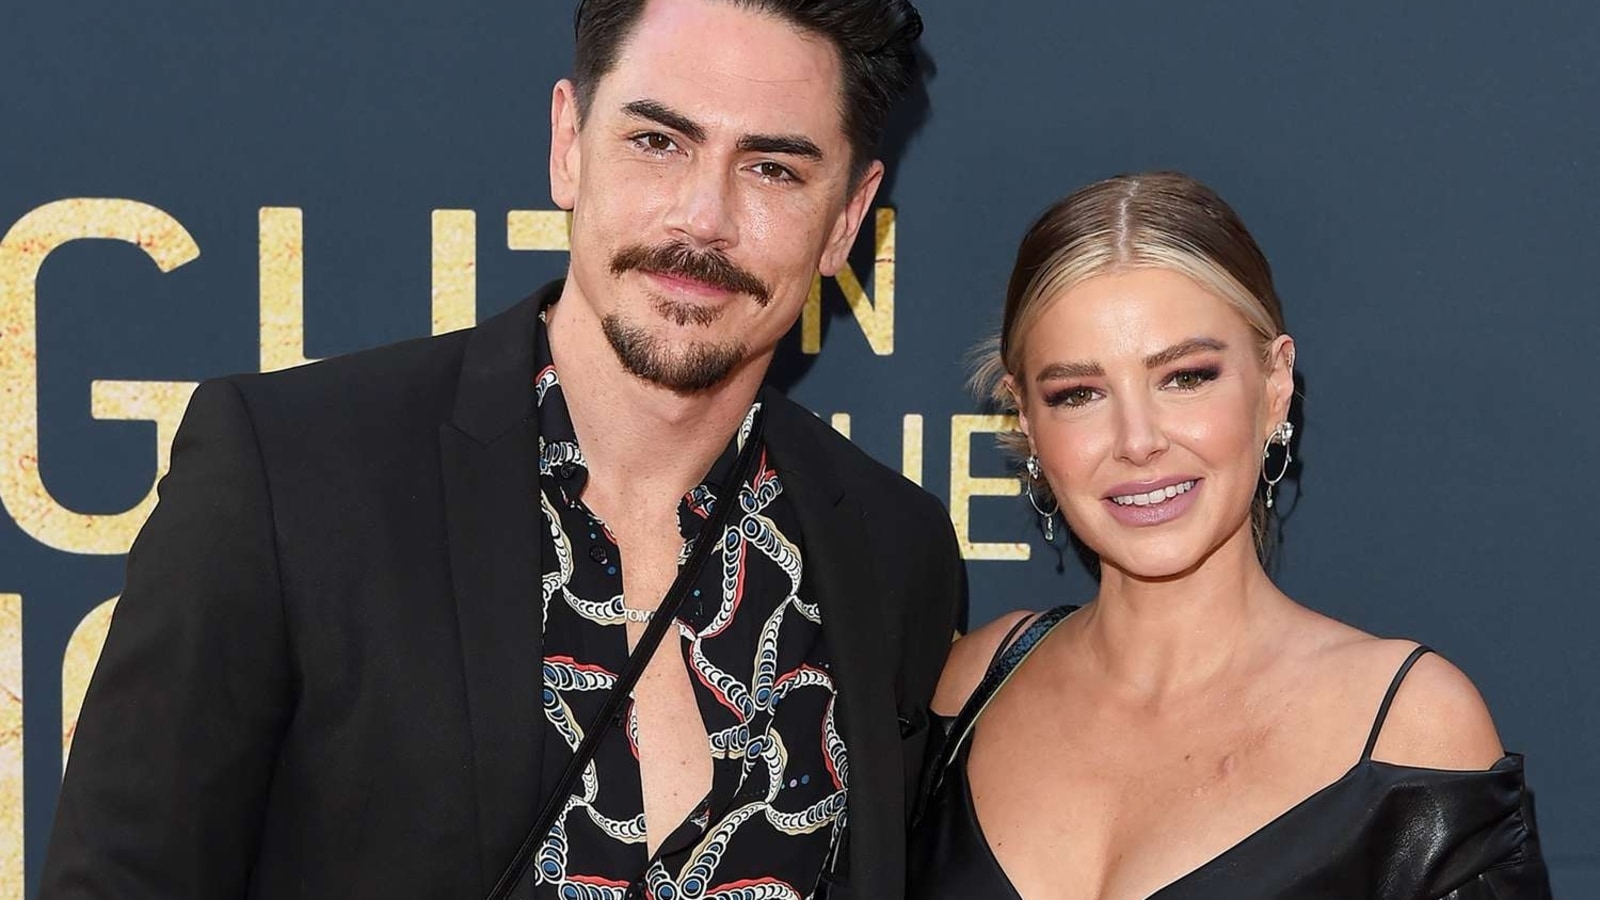 Ariana Madix throws Taylor Swift-style shade at Tom Sandoval after he sues her for sharing explicit video